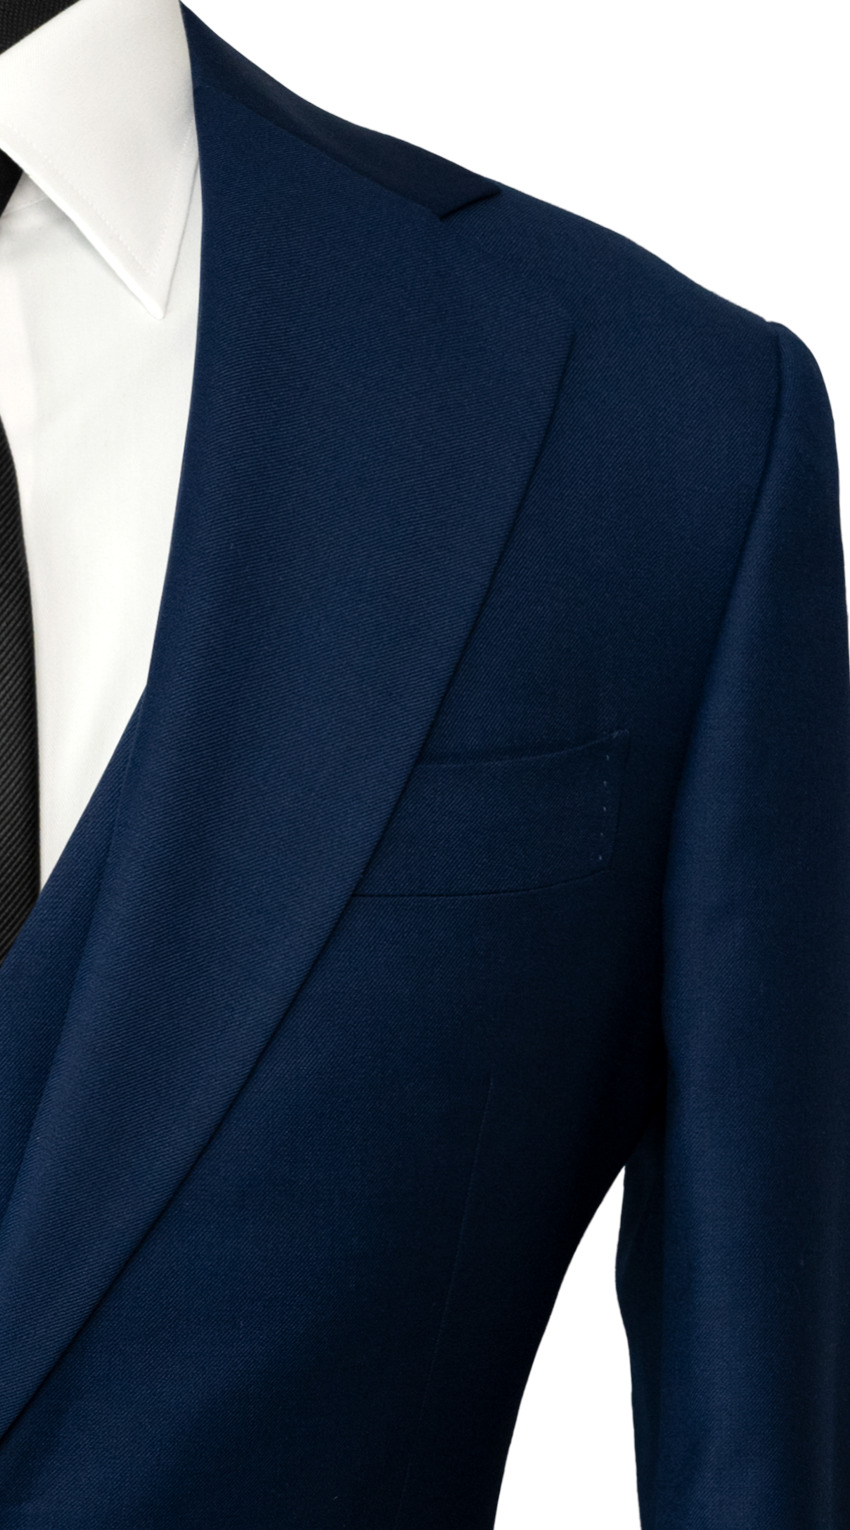 Space Blue Twill Suit